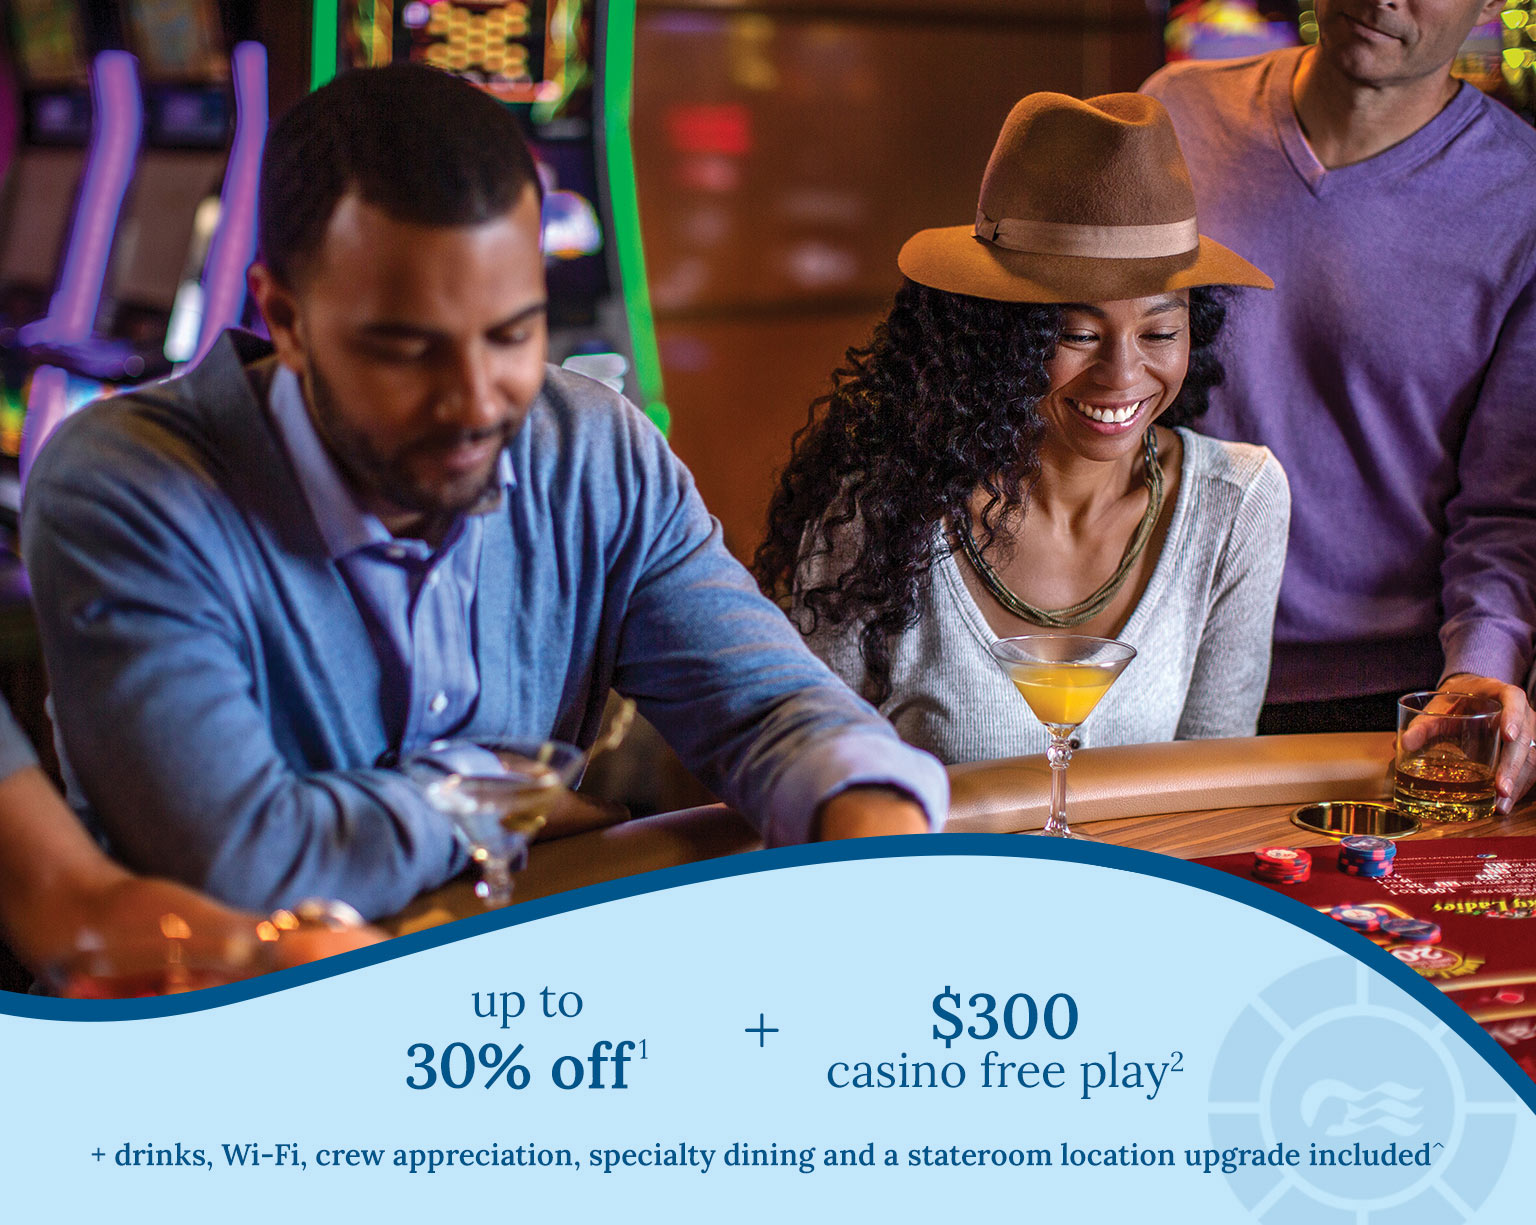 up to 30% off1 + $300 casino free play2